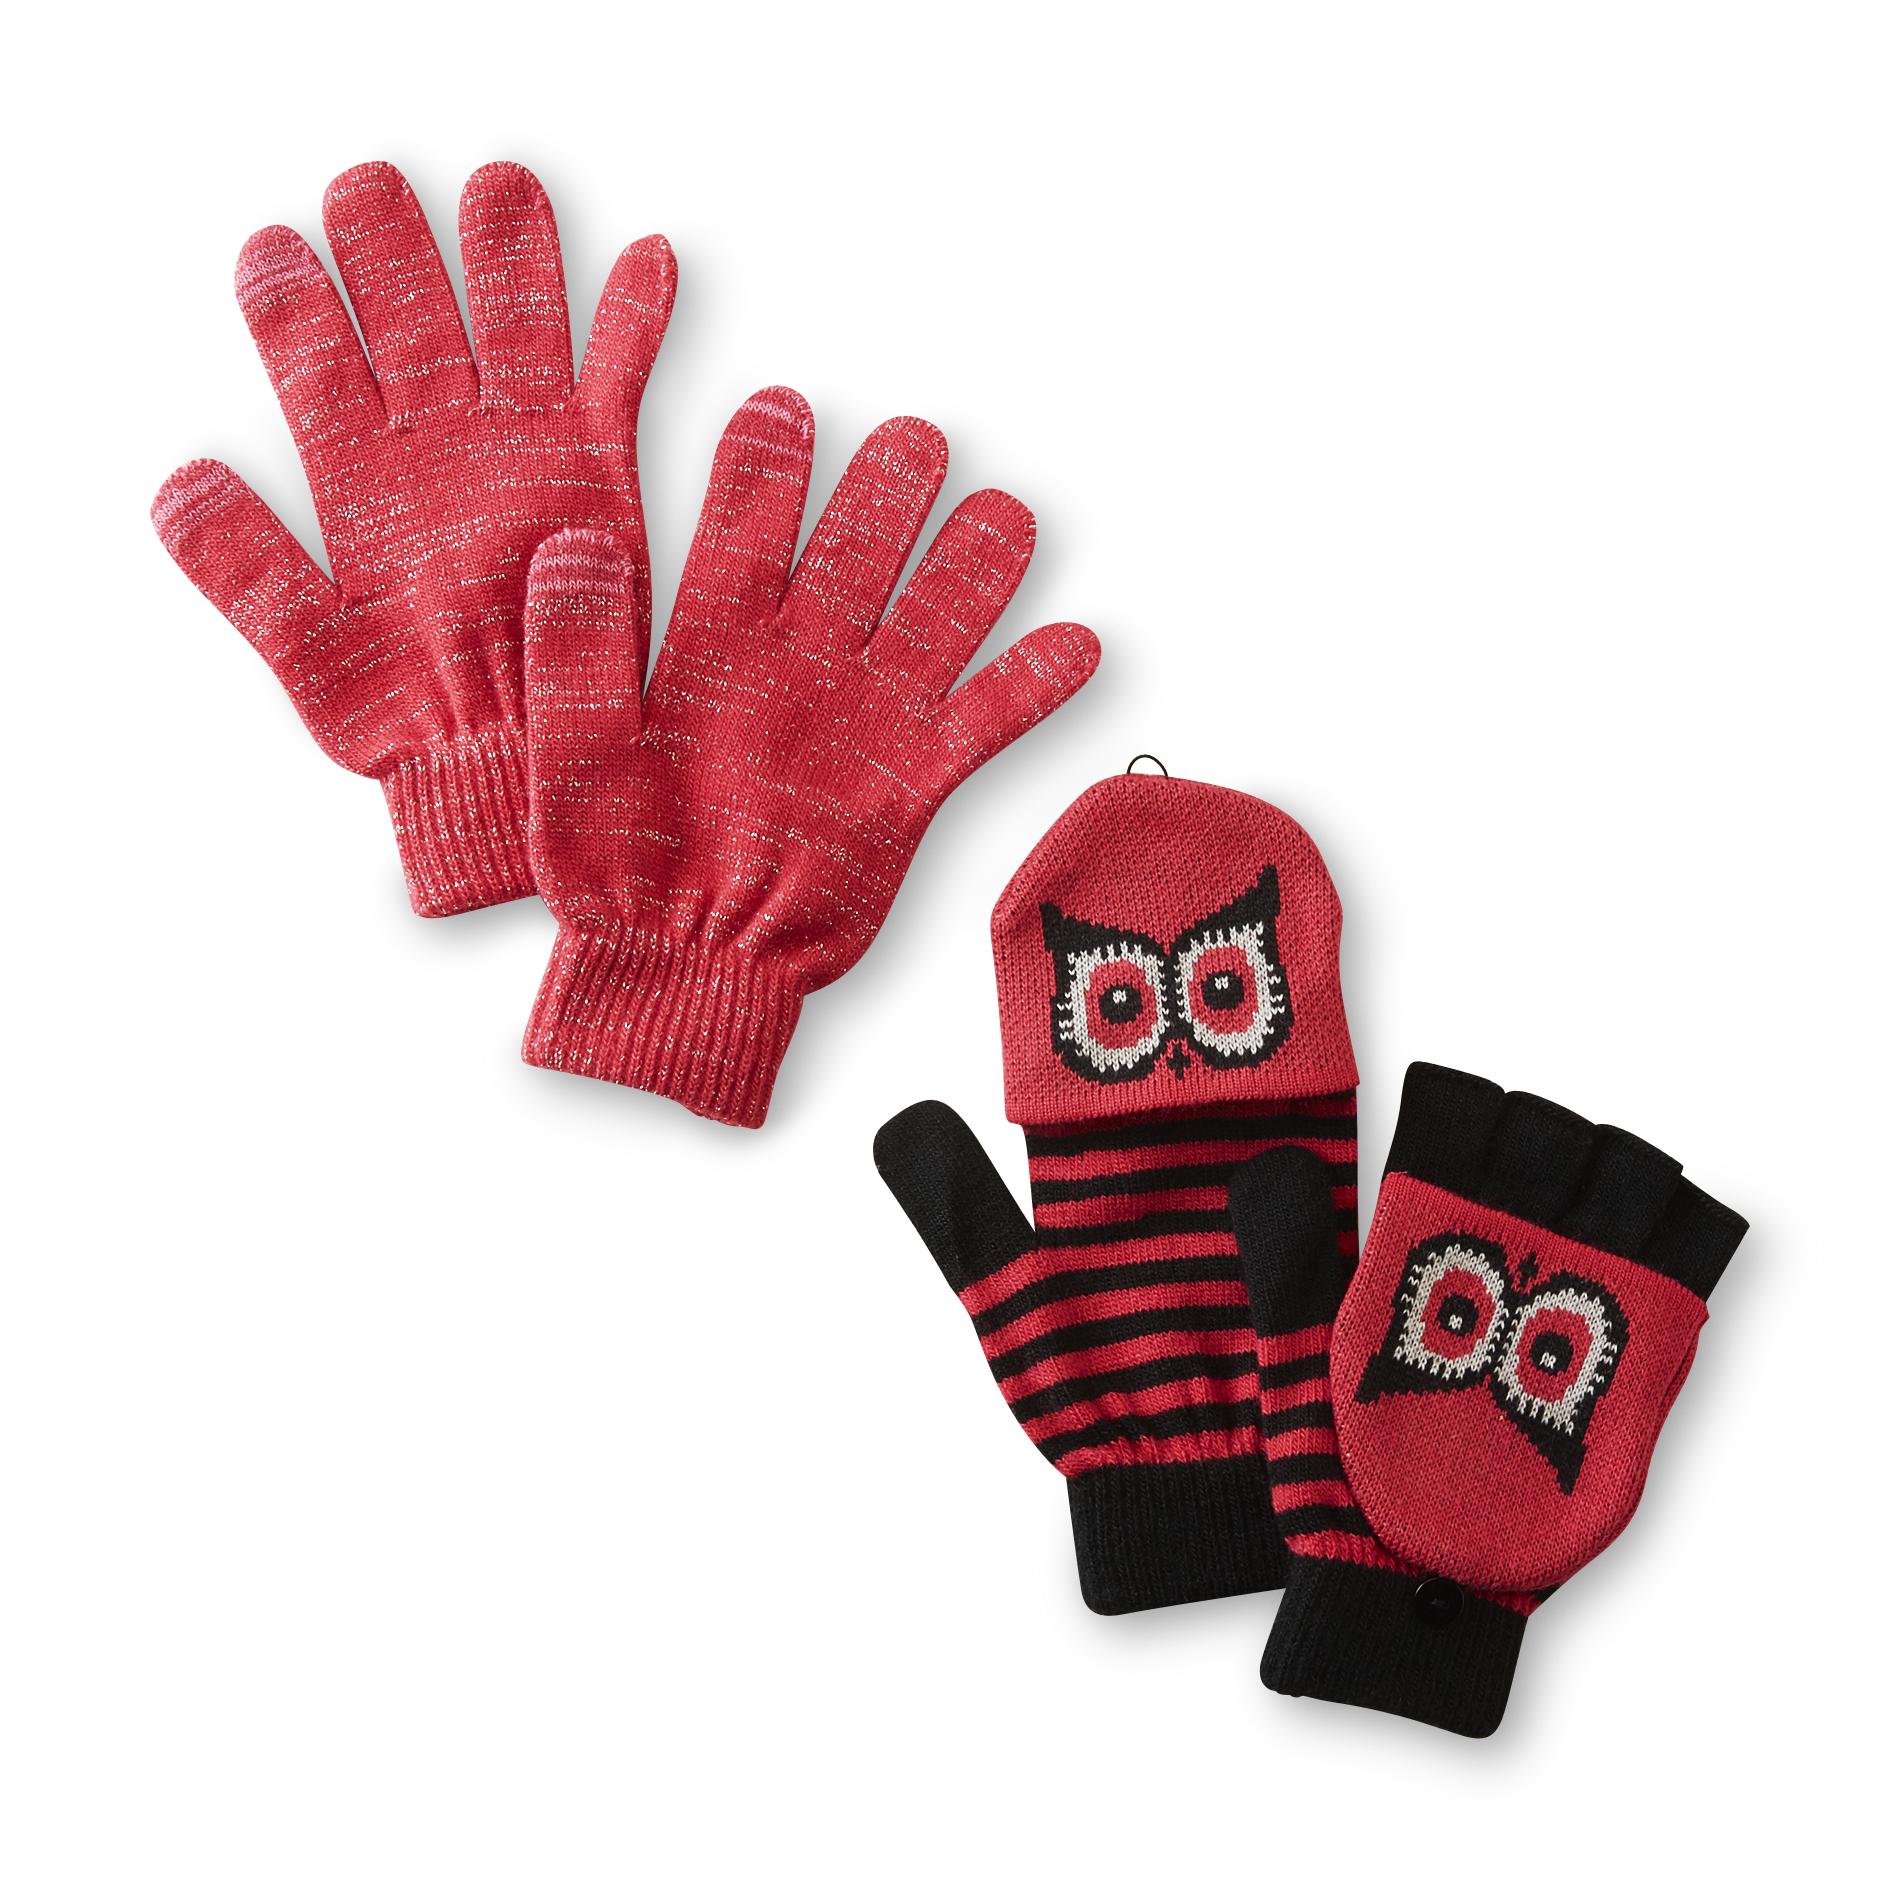 Joe Boxer Junior's 2-Pairs Stretch Knit Texting Gloves - Owl